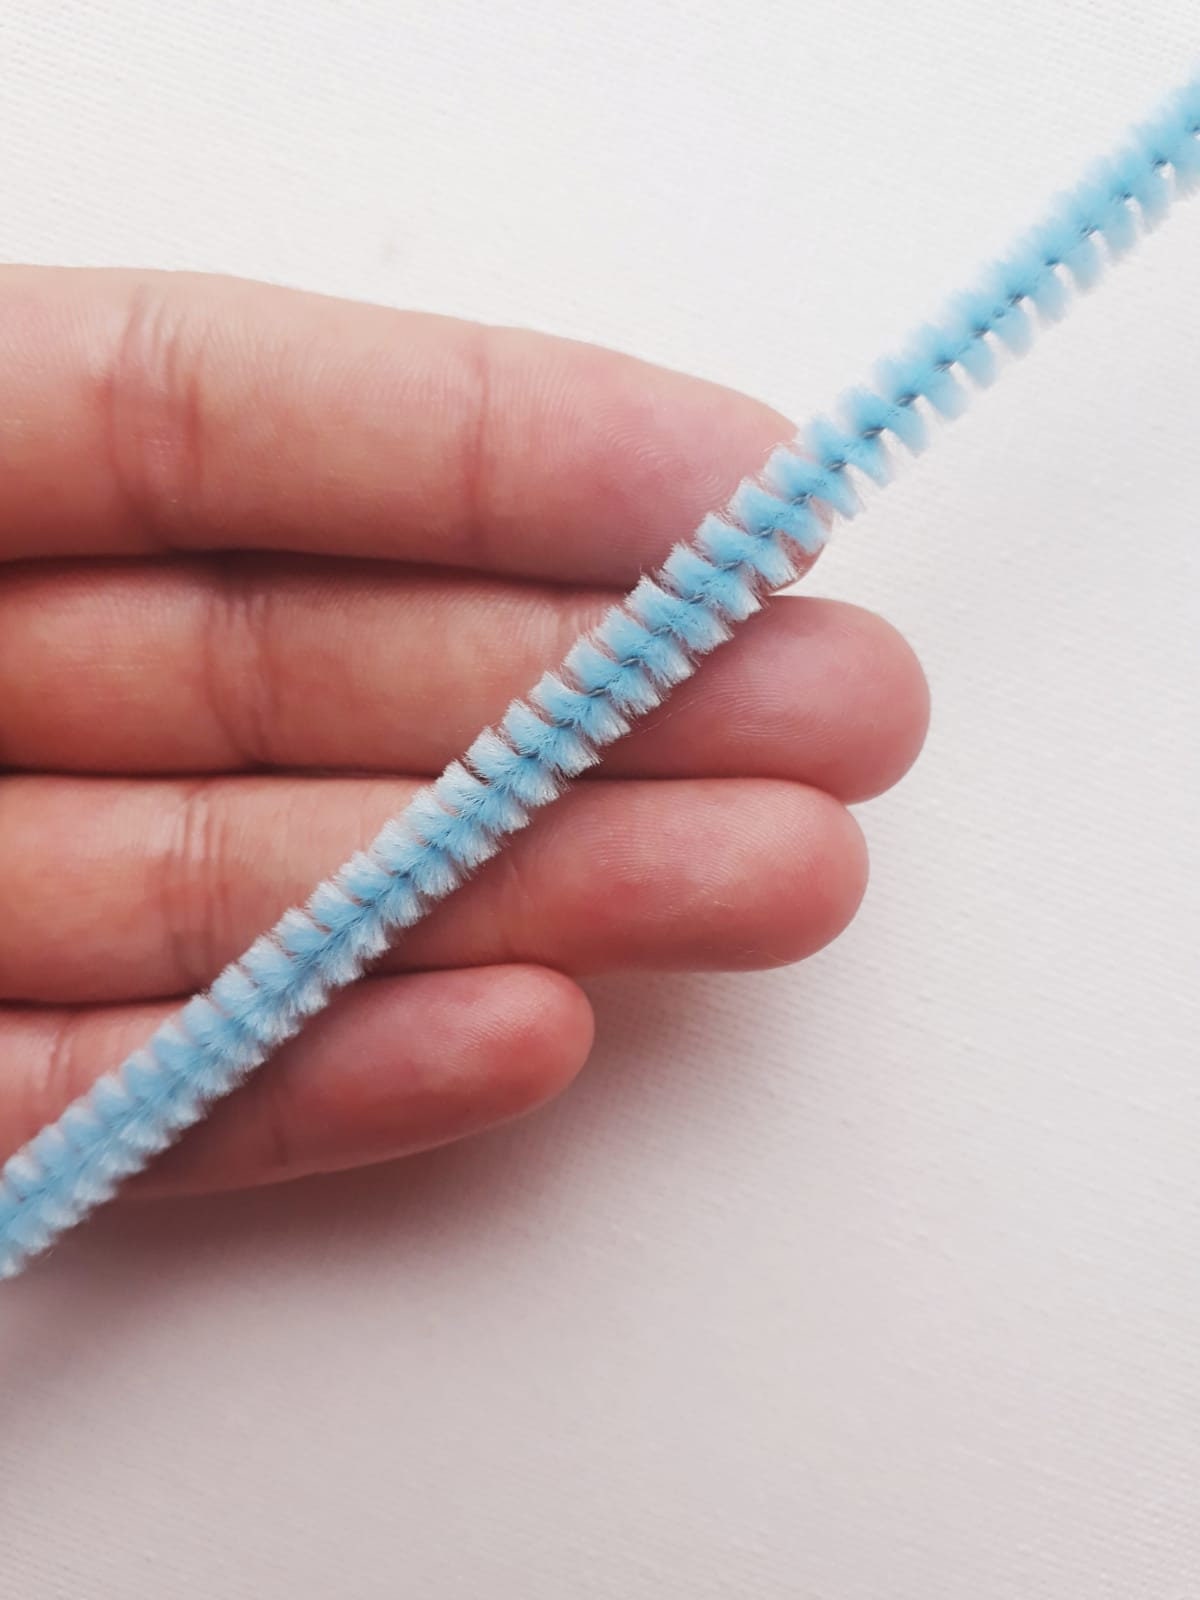 Baby Blue Pipe Cleaners For Children